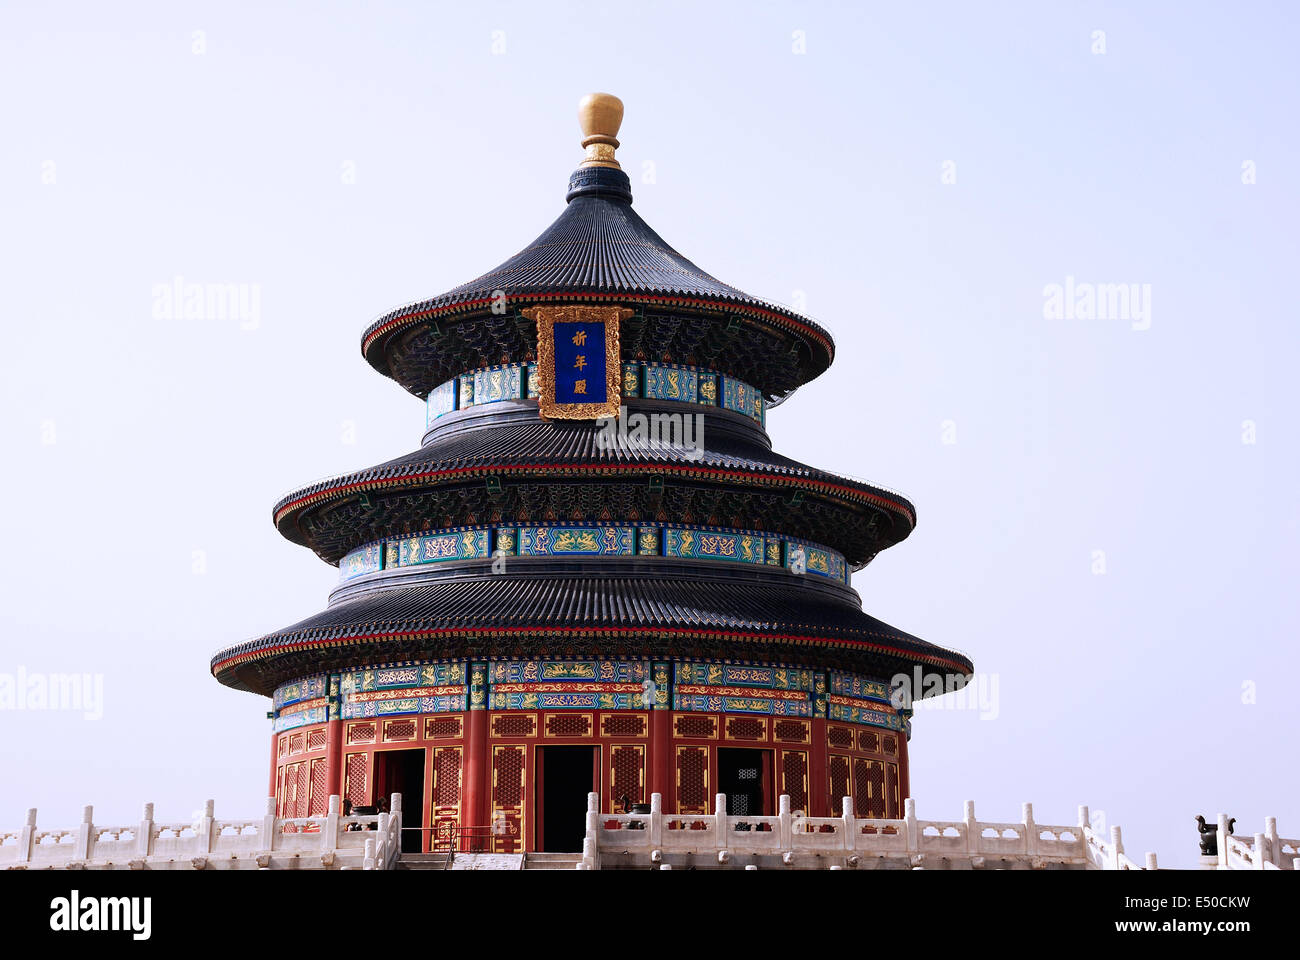 This is Temple of Heaven in China Stock Photo